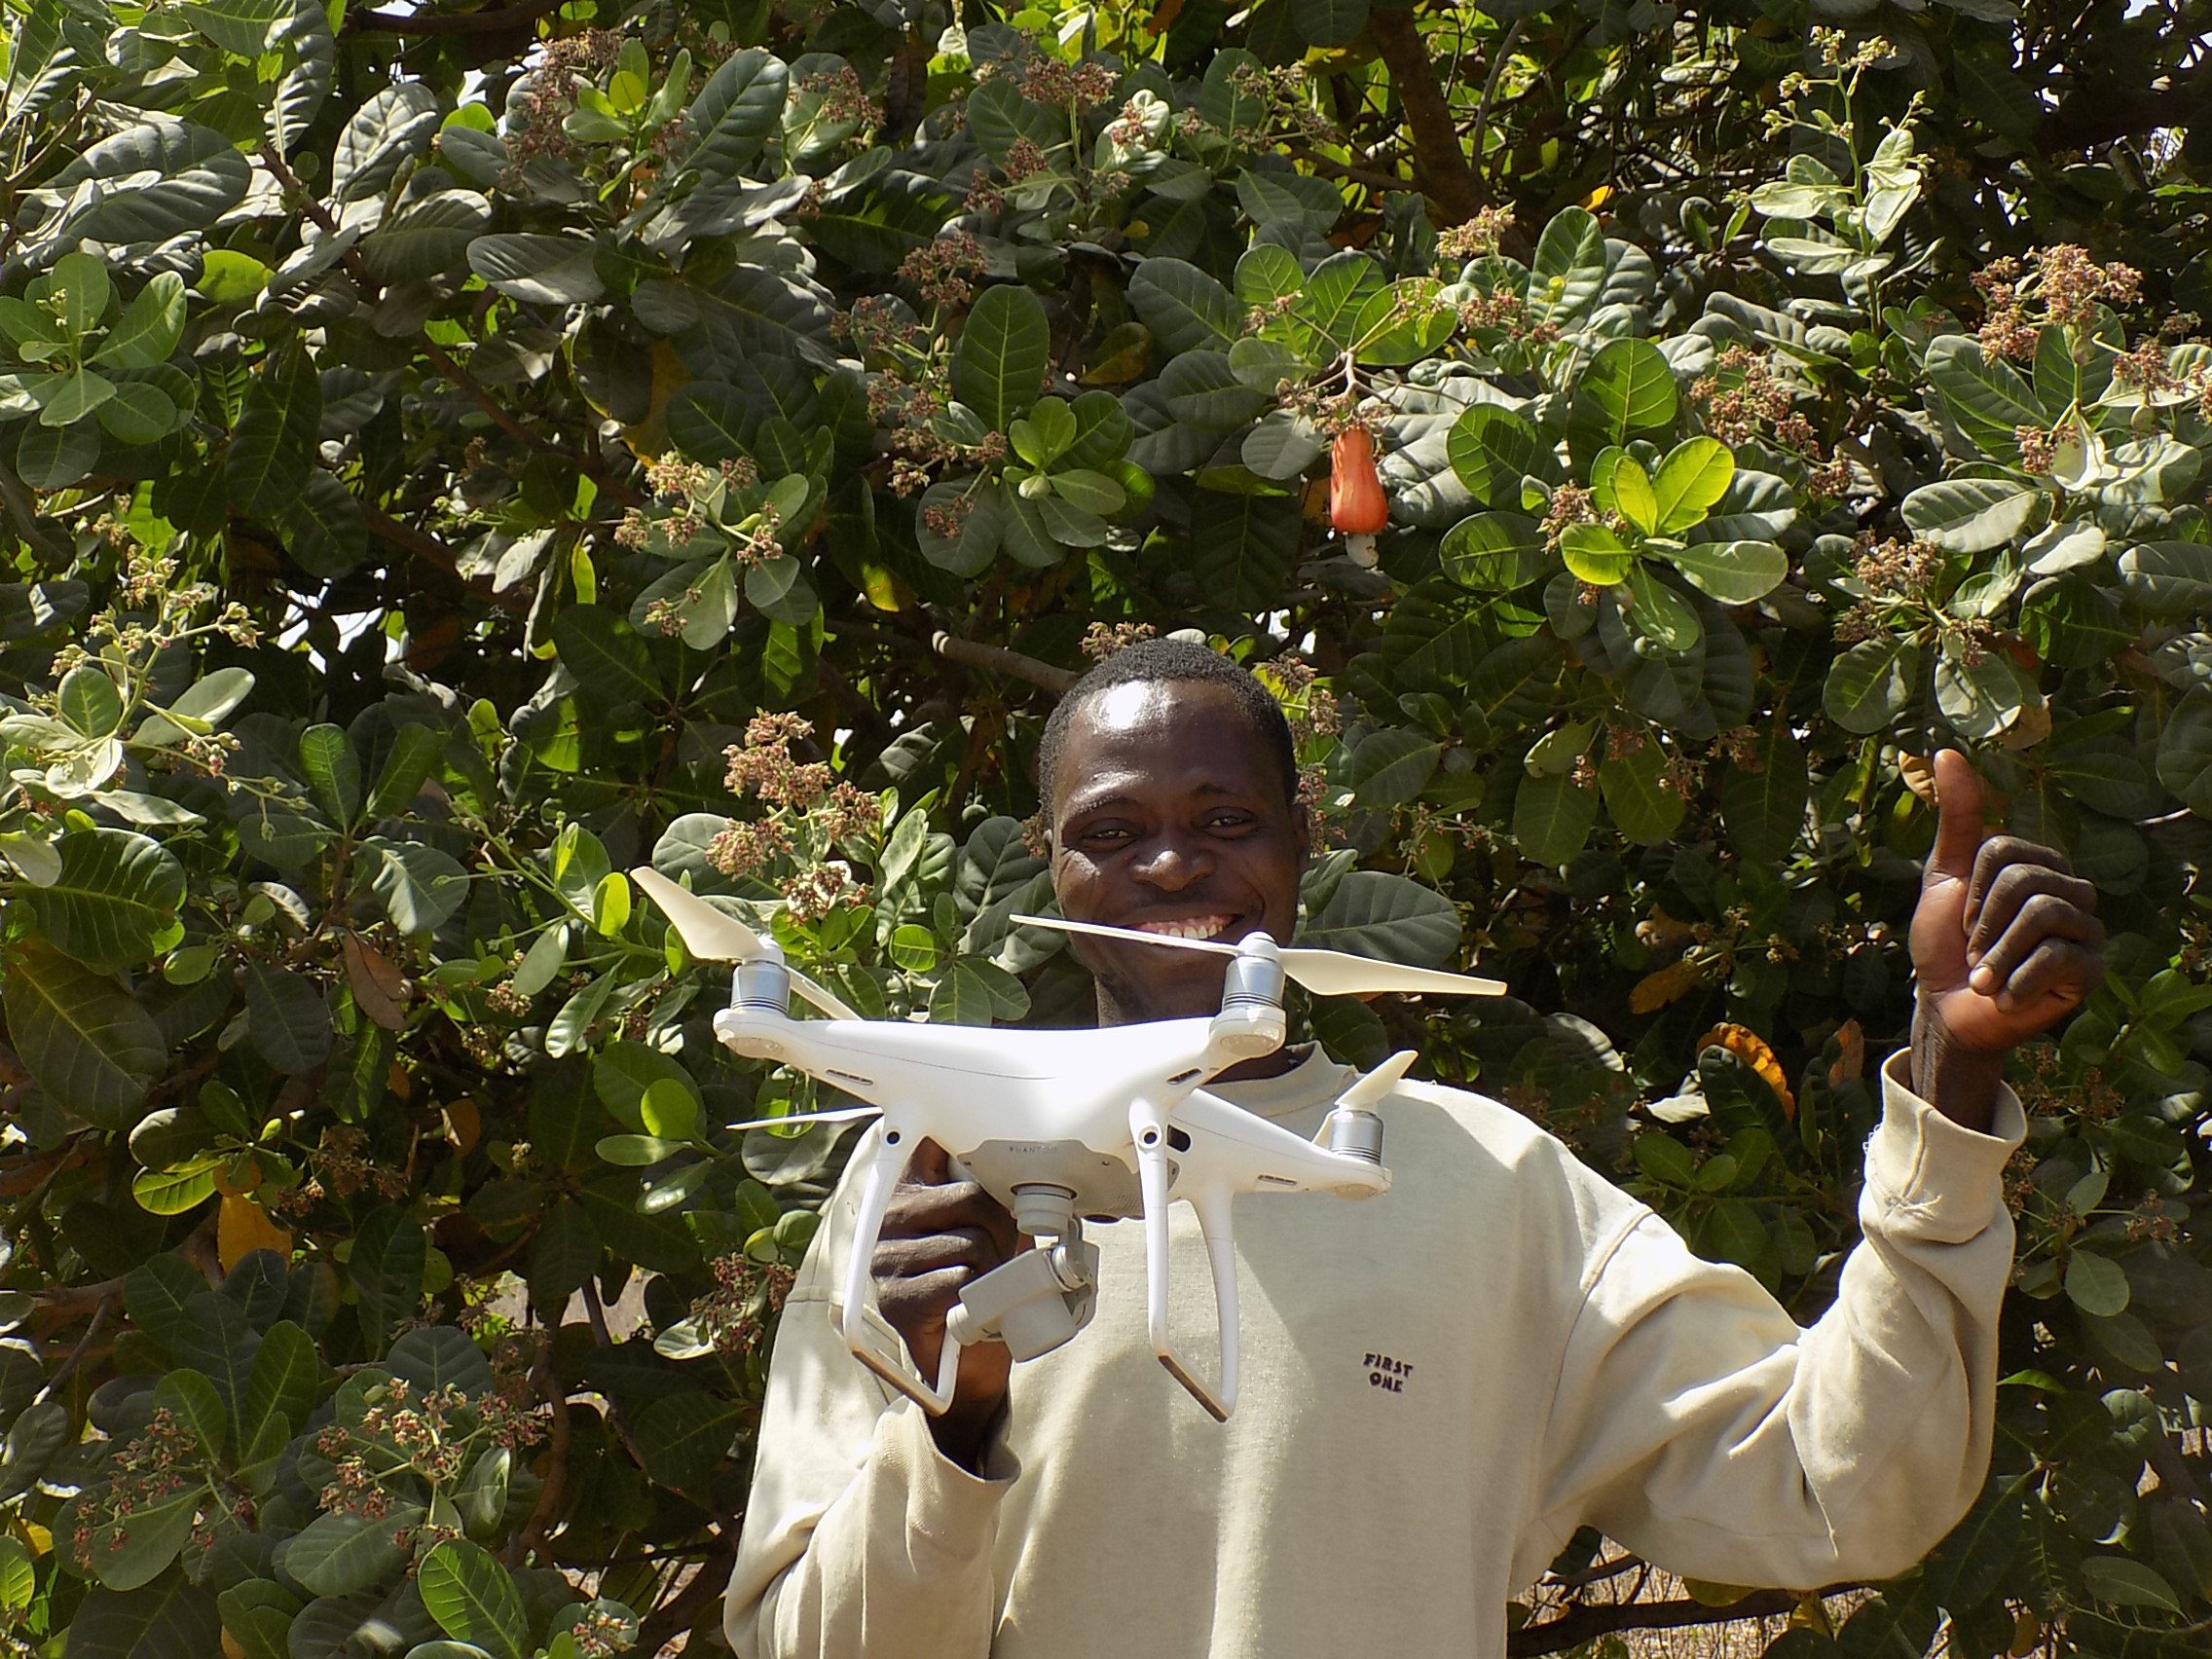 Many types of technology reduce poverty. Using remote sensing data (images and information taken from satellites or drones) helps farmers plant strategically plant their crops to increase their farm productivity, crop yields, and incomes. In this photos, A man holds a drone in a field in Benin